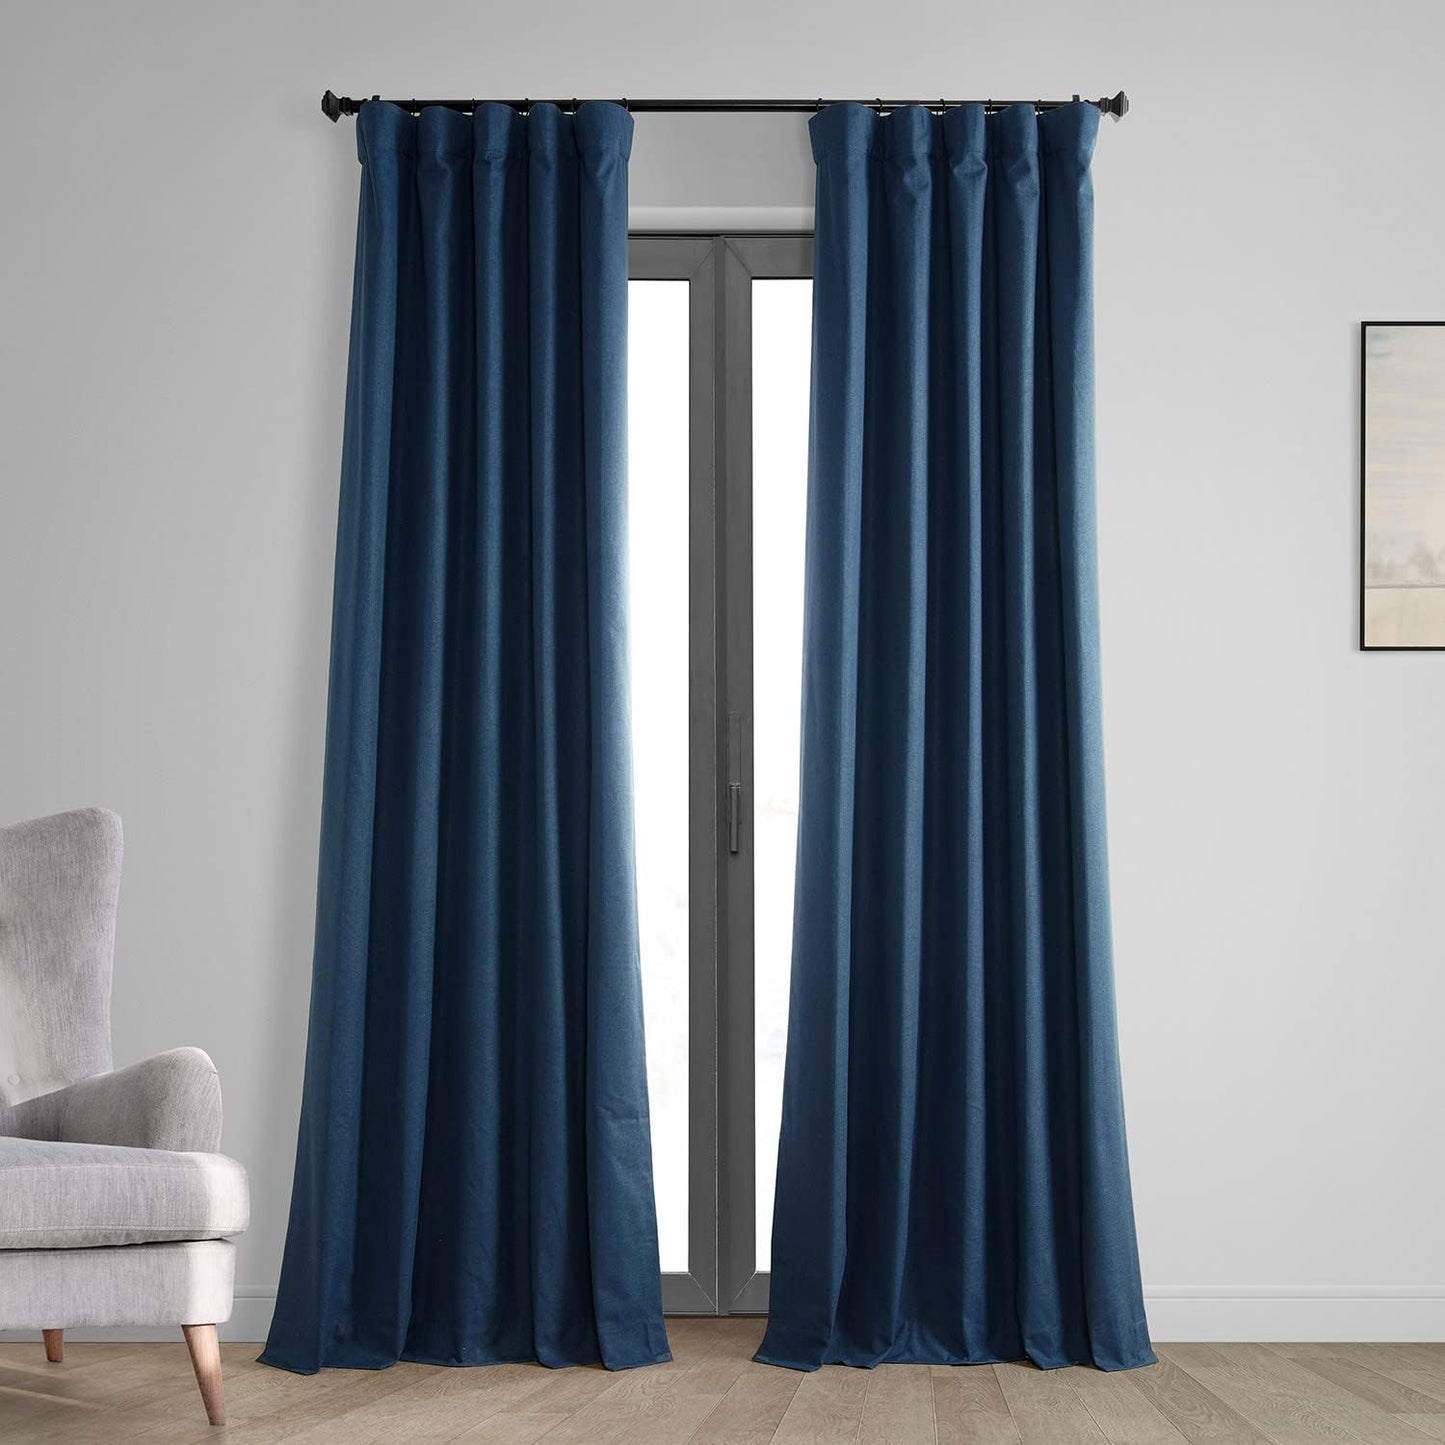 HPD Half Price Drapes Vintage Blackout Curtains for Bedroom - 96 Inches Long Thermal Cross Linen Weave Full Light Blocking 1 Panel Blackout Curtain, (50W X 96L), Millennial Grey  Exclusive Fabrics & Furnishings Indigo 50W X 108L 